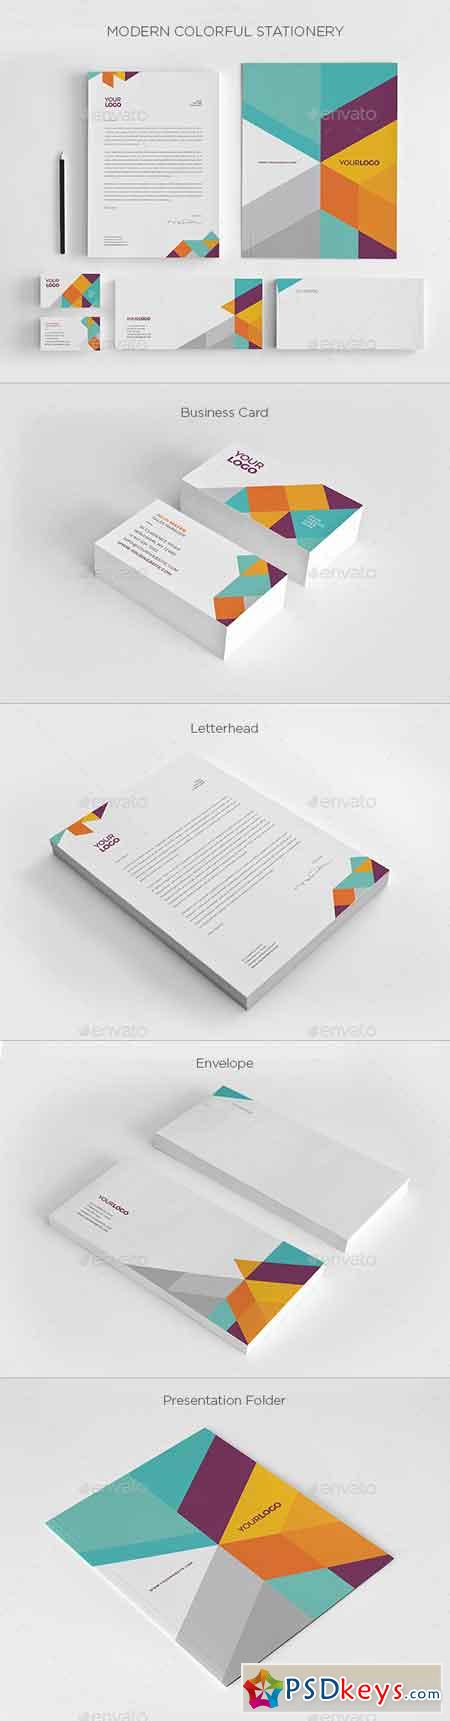 Modern Colorful Stationery 7717605